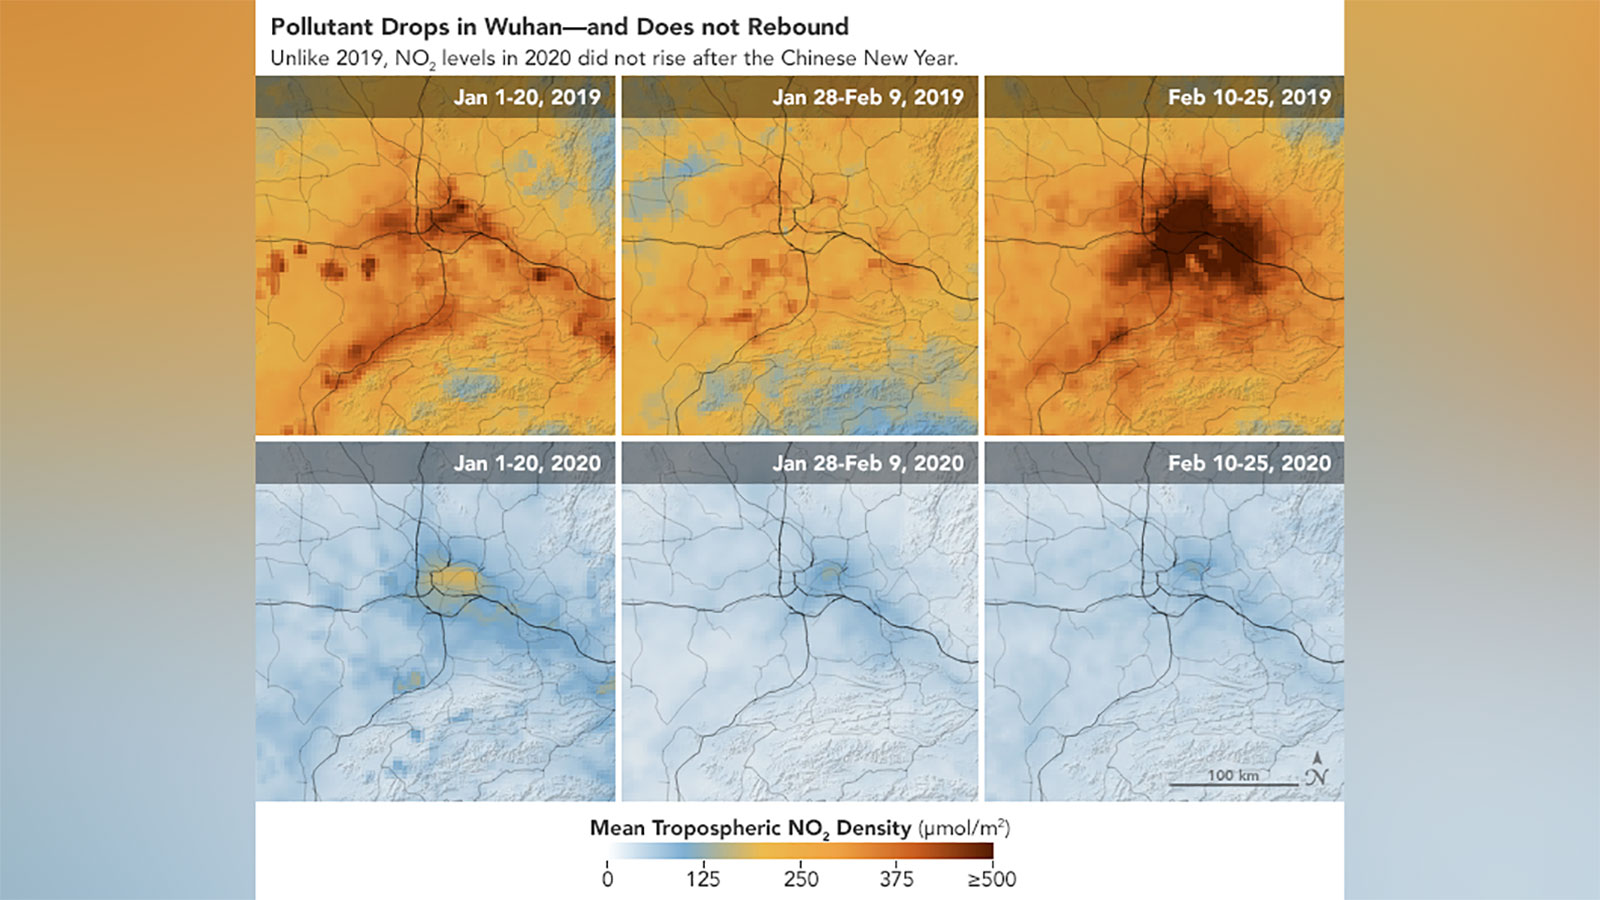 Images over Wuhan showing the pollutant numbers dropping but not rebounding. Credit: NASA